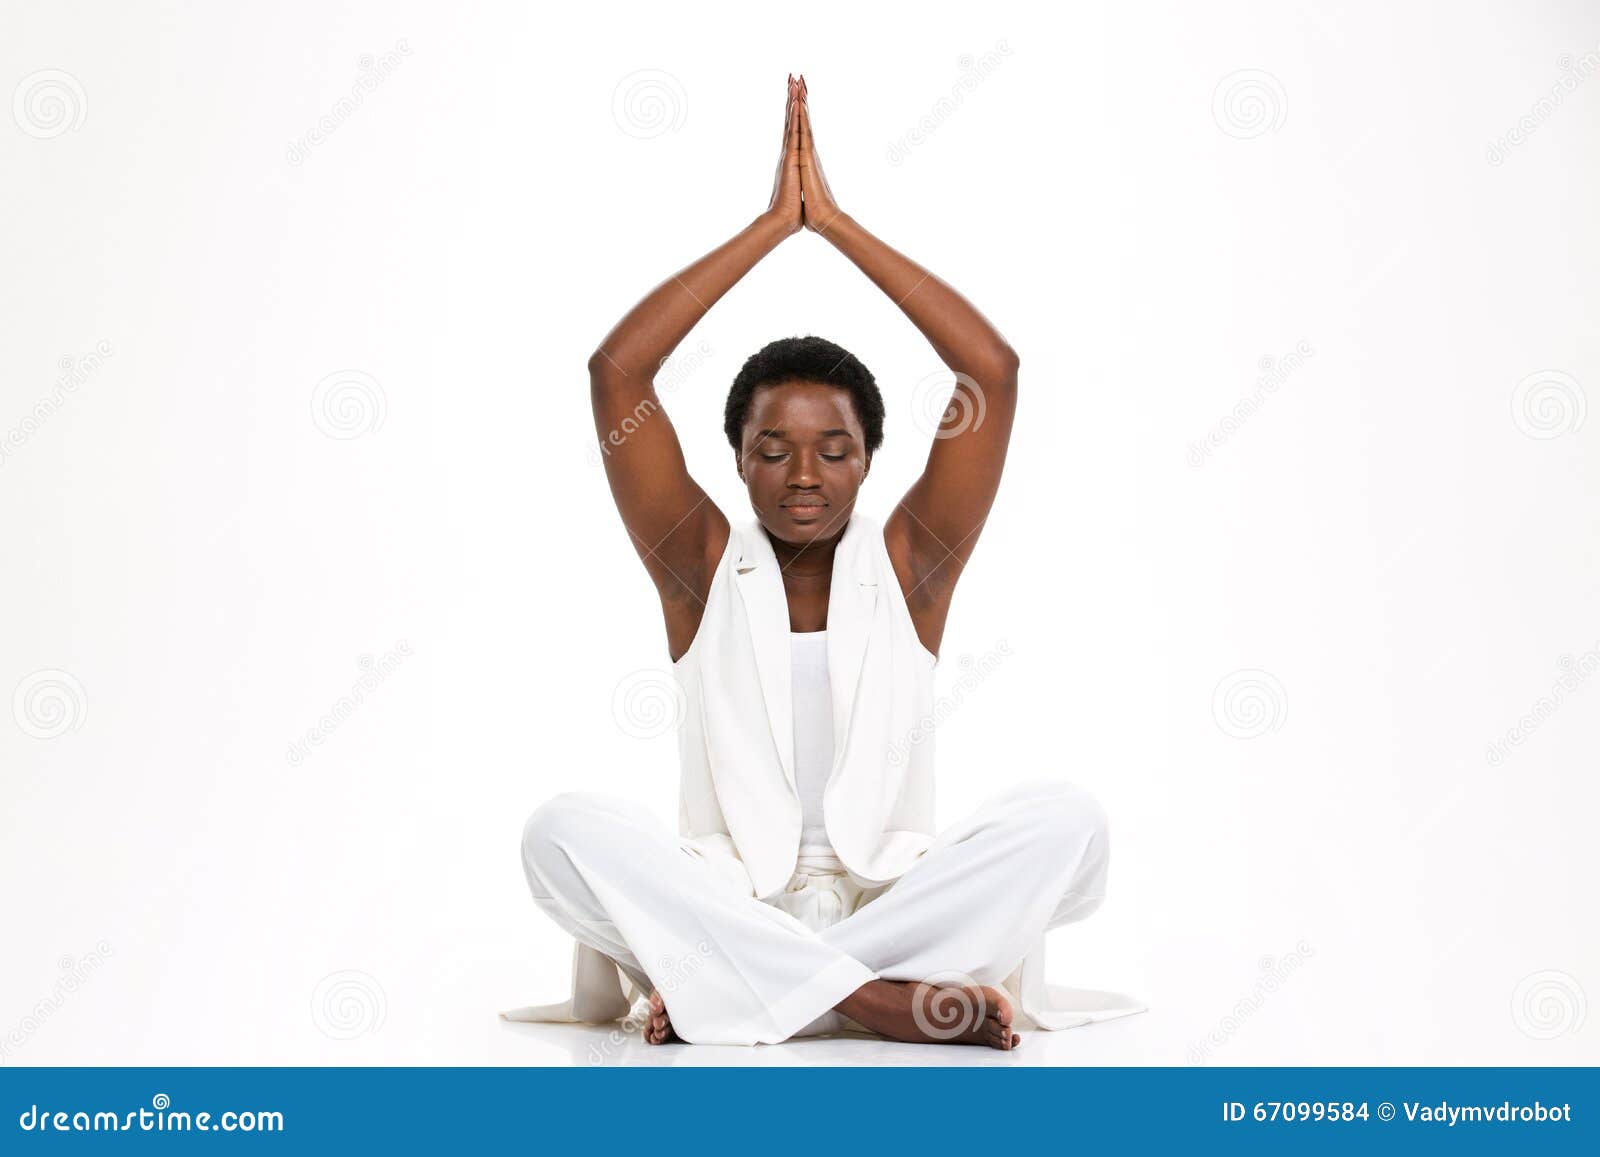 Yoga pose silhouetter with sunset background vector 02 free download